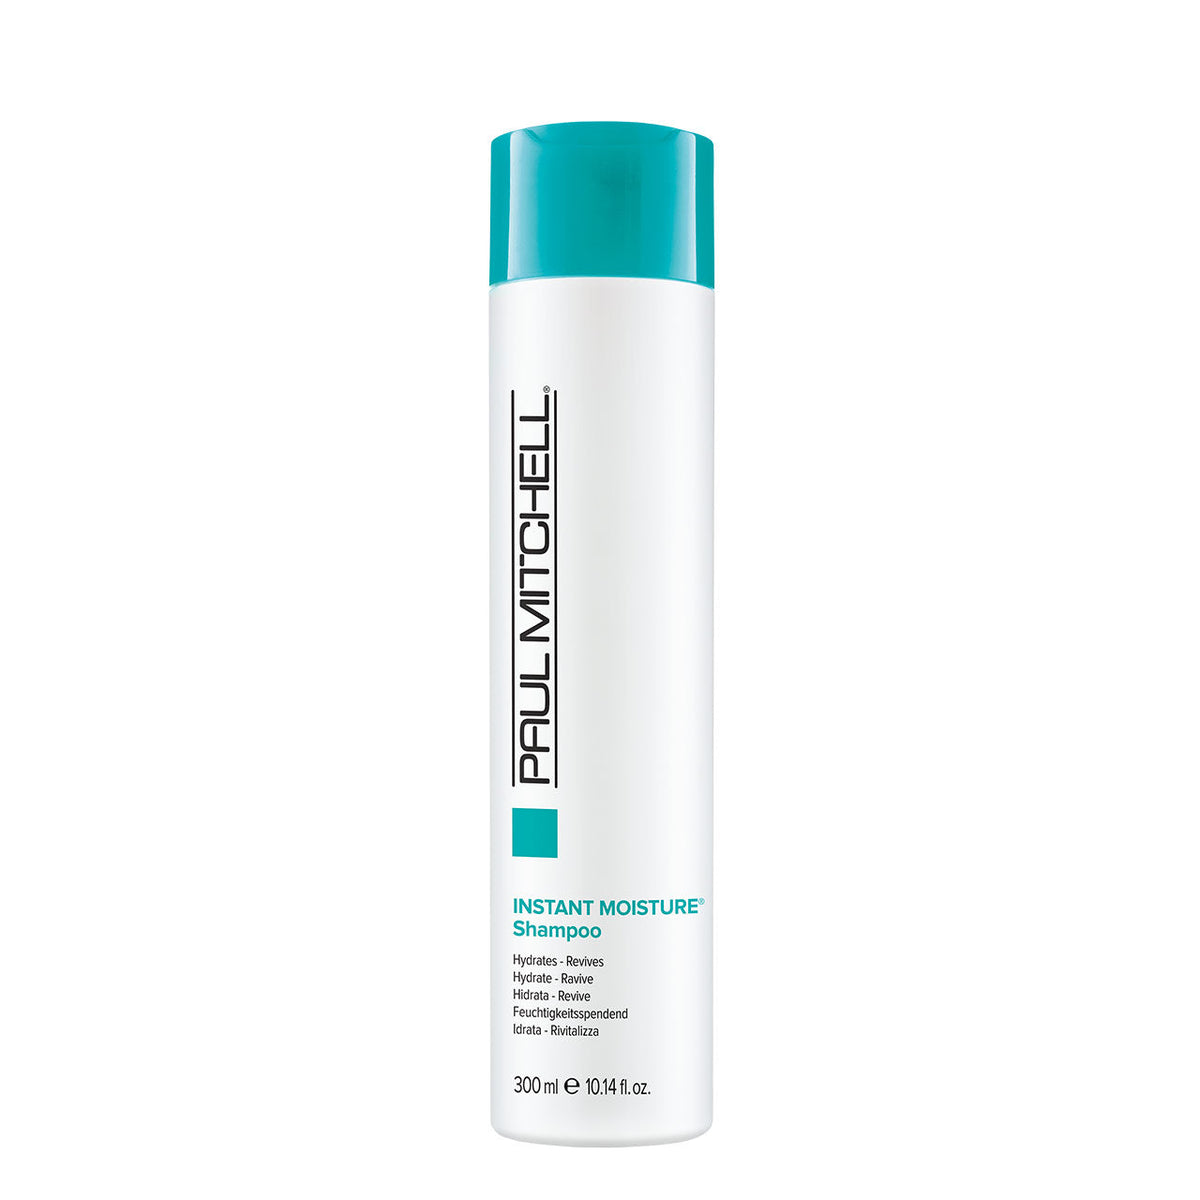 Instant Moisture Shampoo - 300ML - by Paul Mitchell |ProCare Outlet|